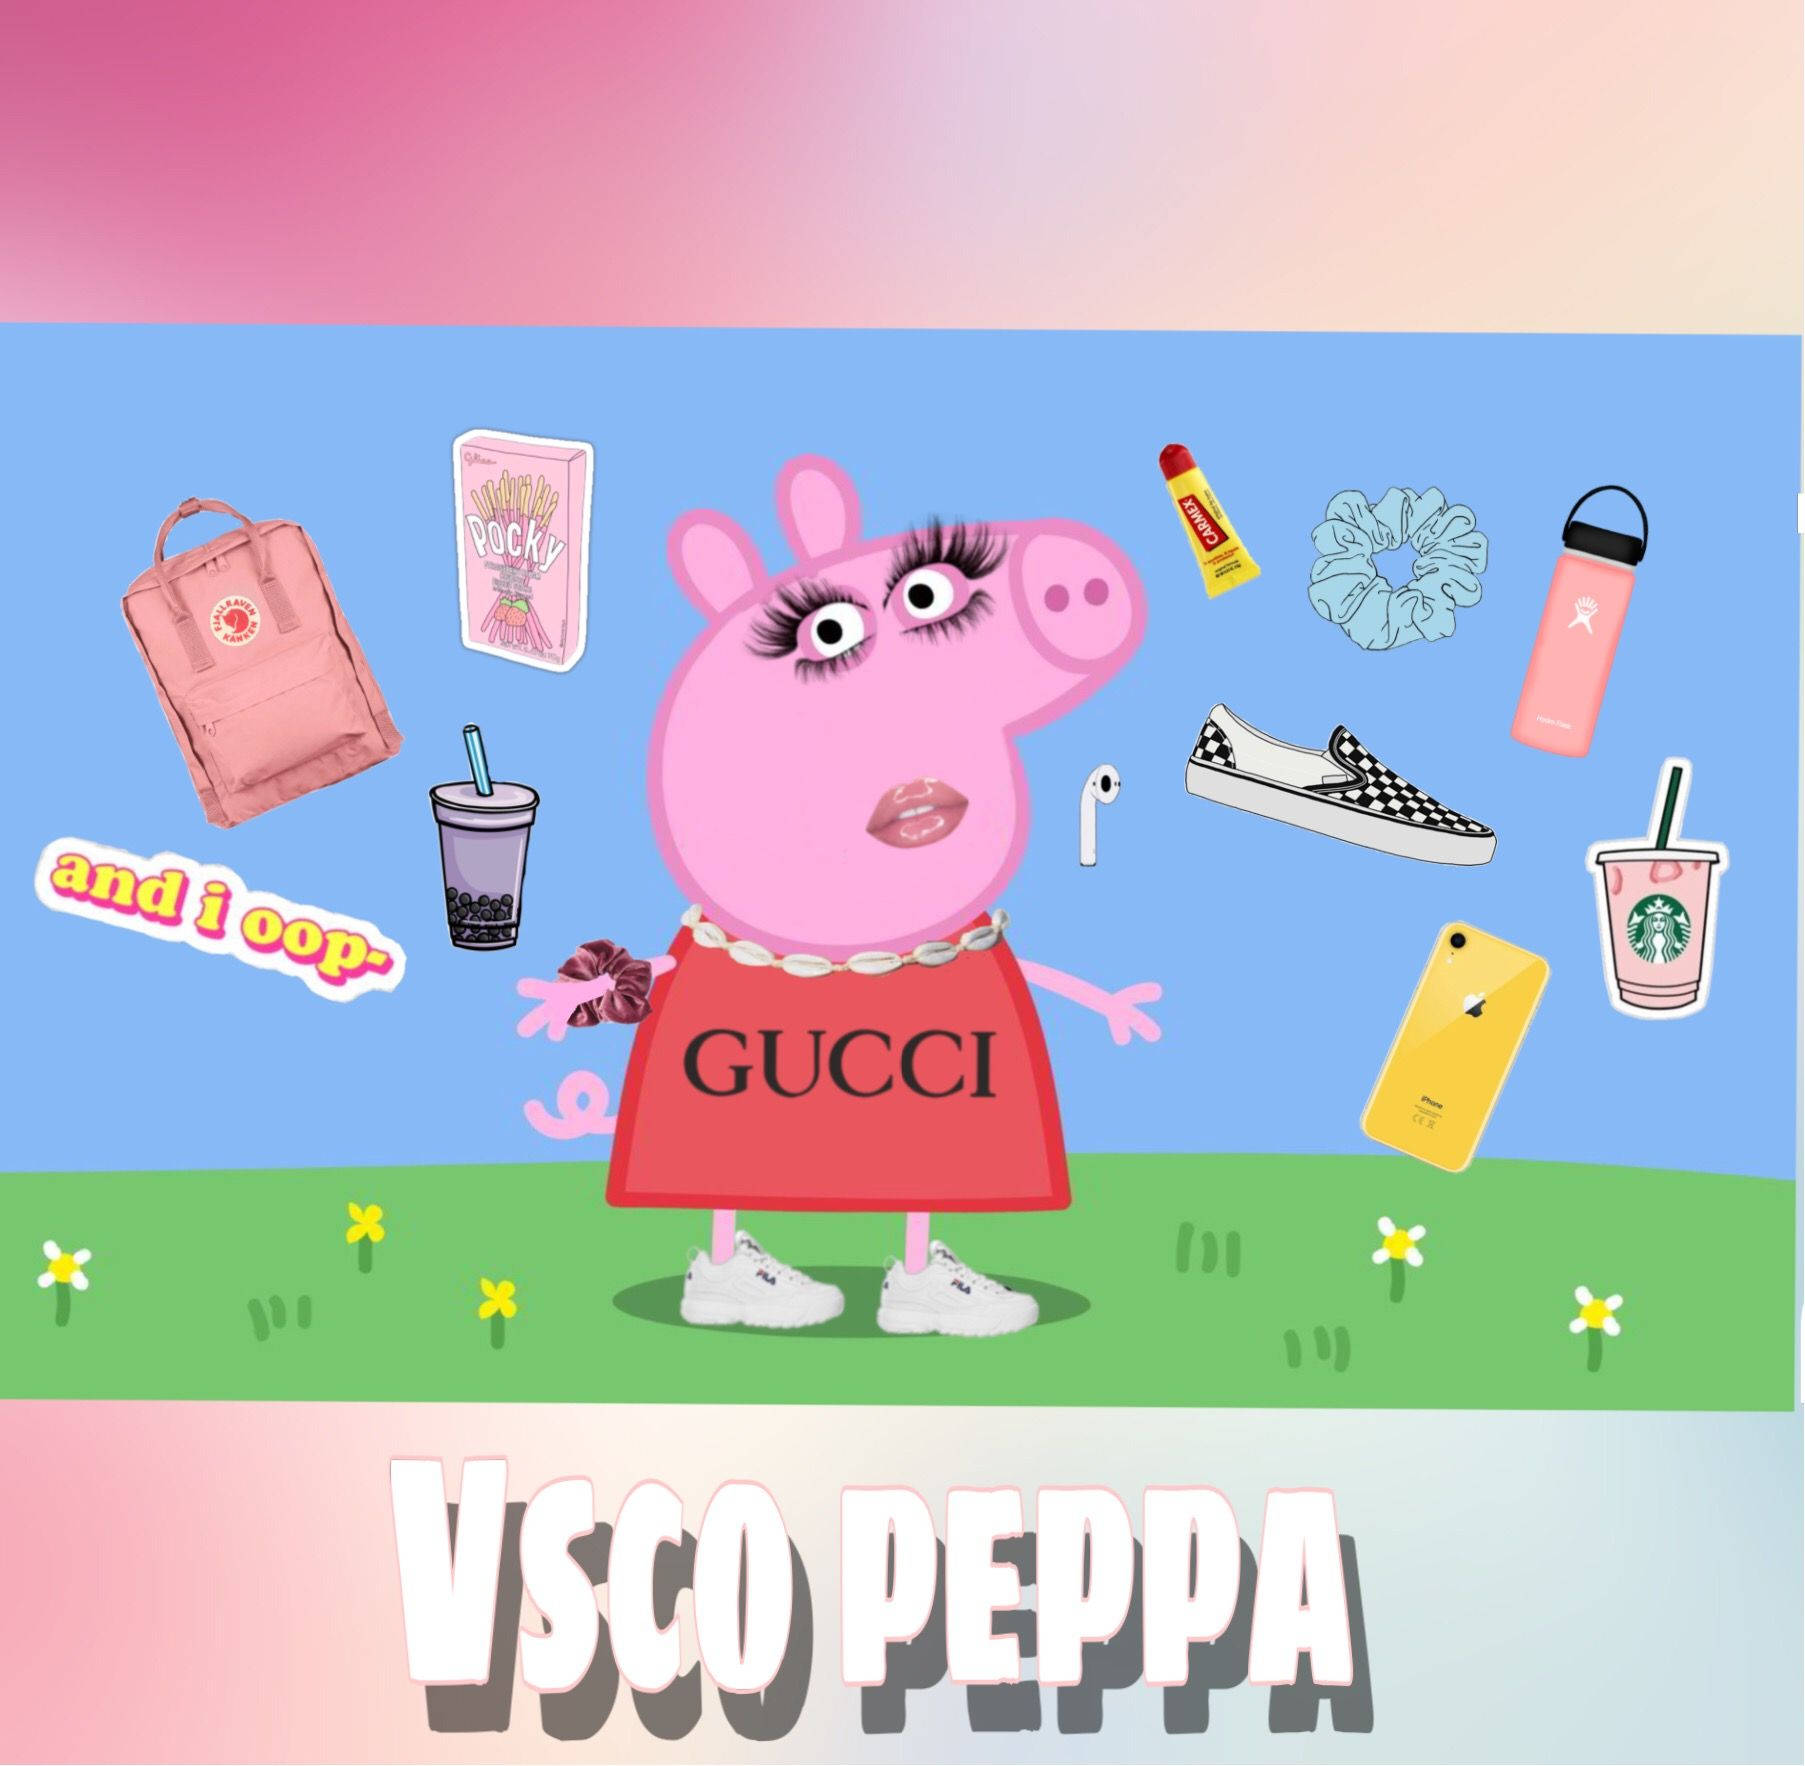 Baddie Peppa Pig ready to party! Wallpaper